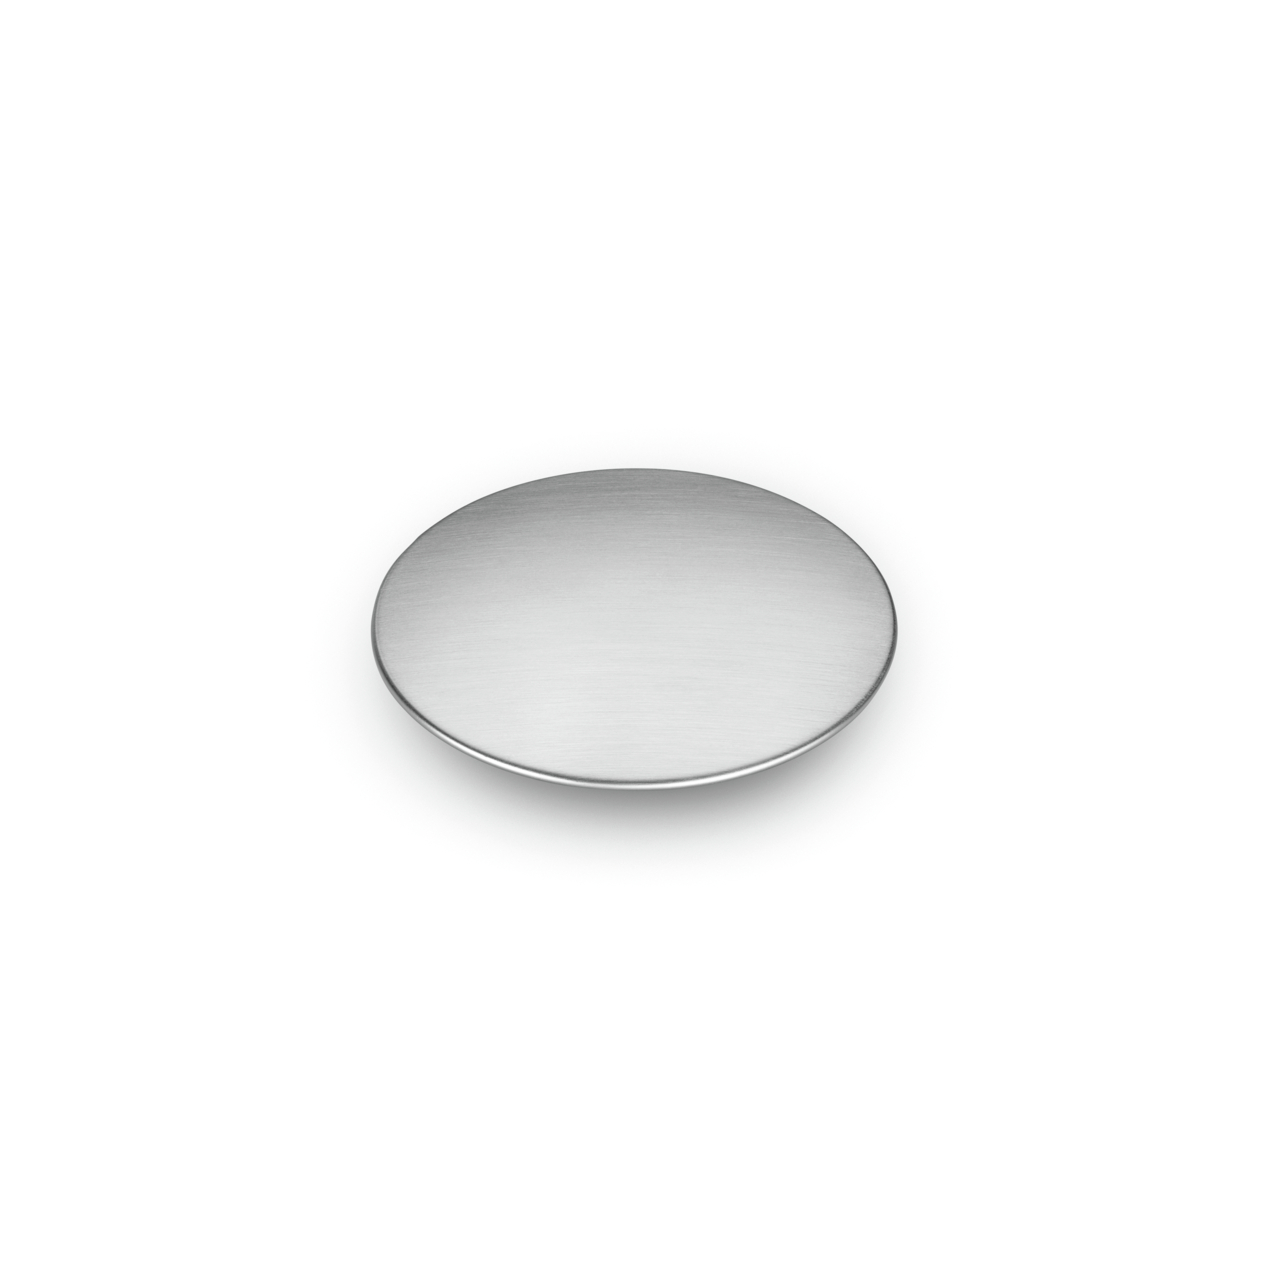 Cover cap drain cover, brushed stainless steel